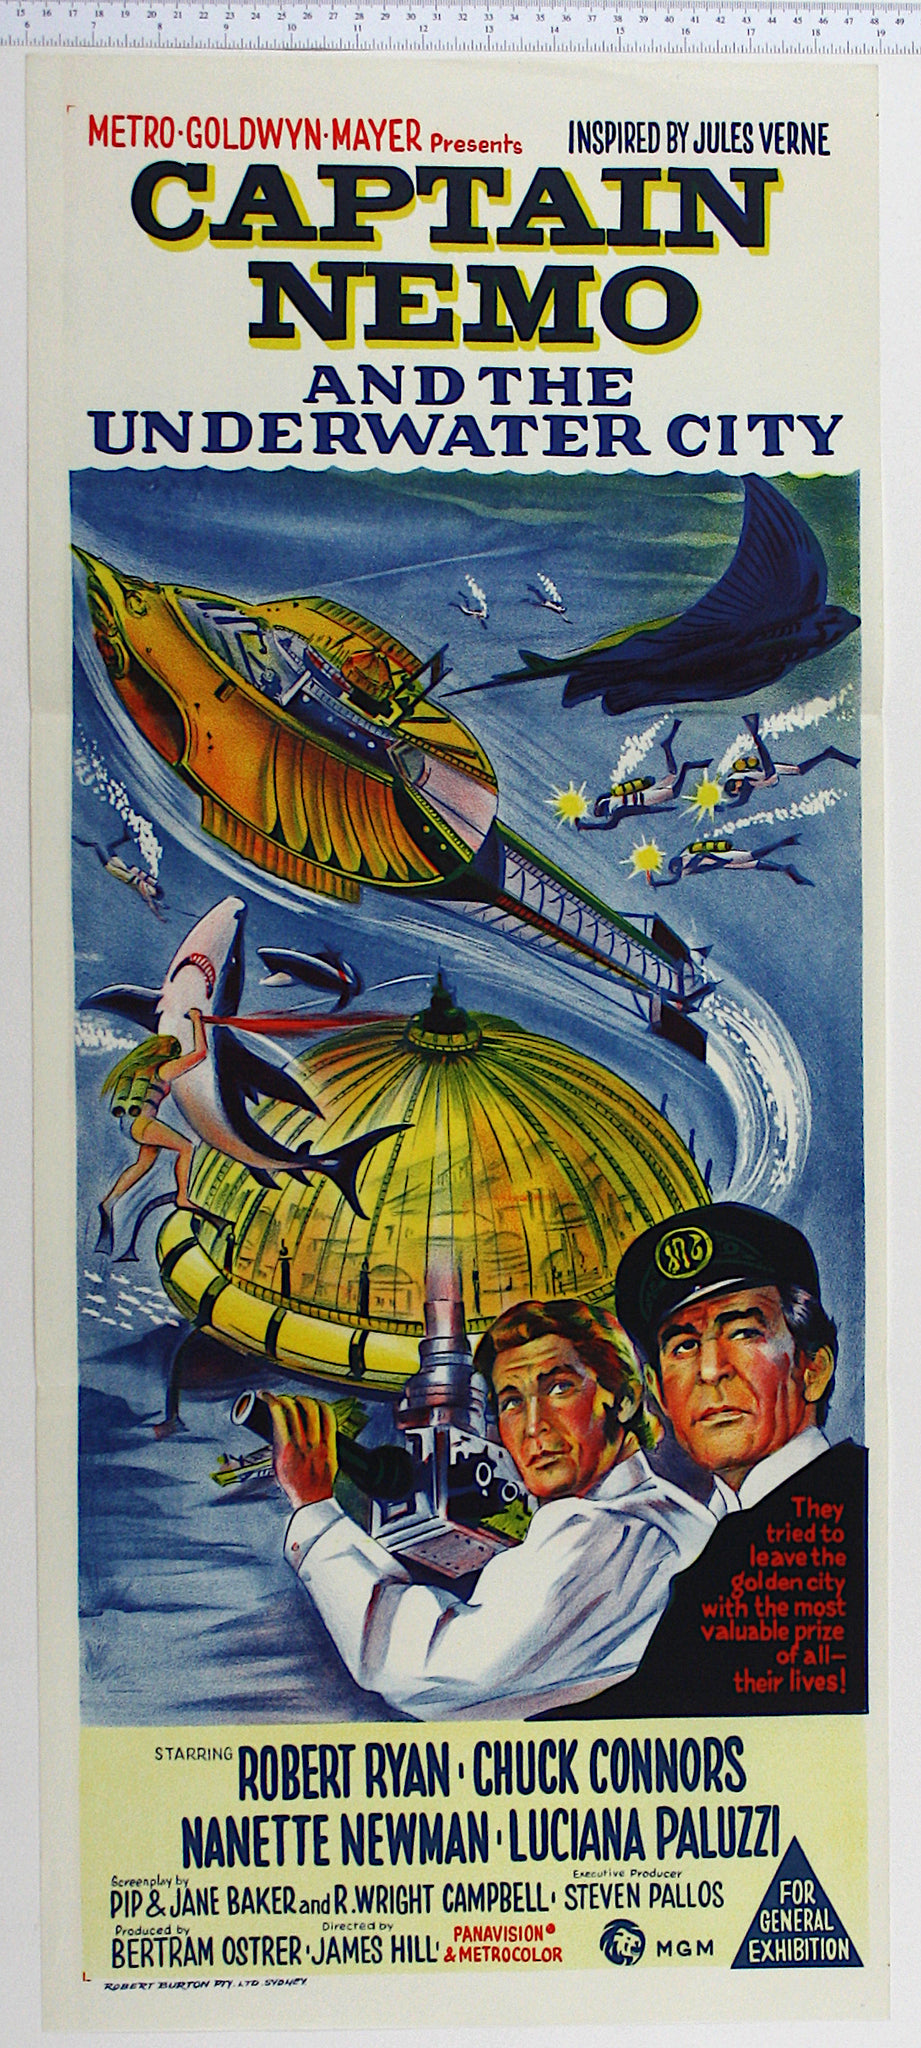 Stone litho artwork of the Nautilus, underwater city, a large ray and shark menacing divers, with Ryan and Connors bottom right.